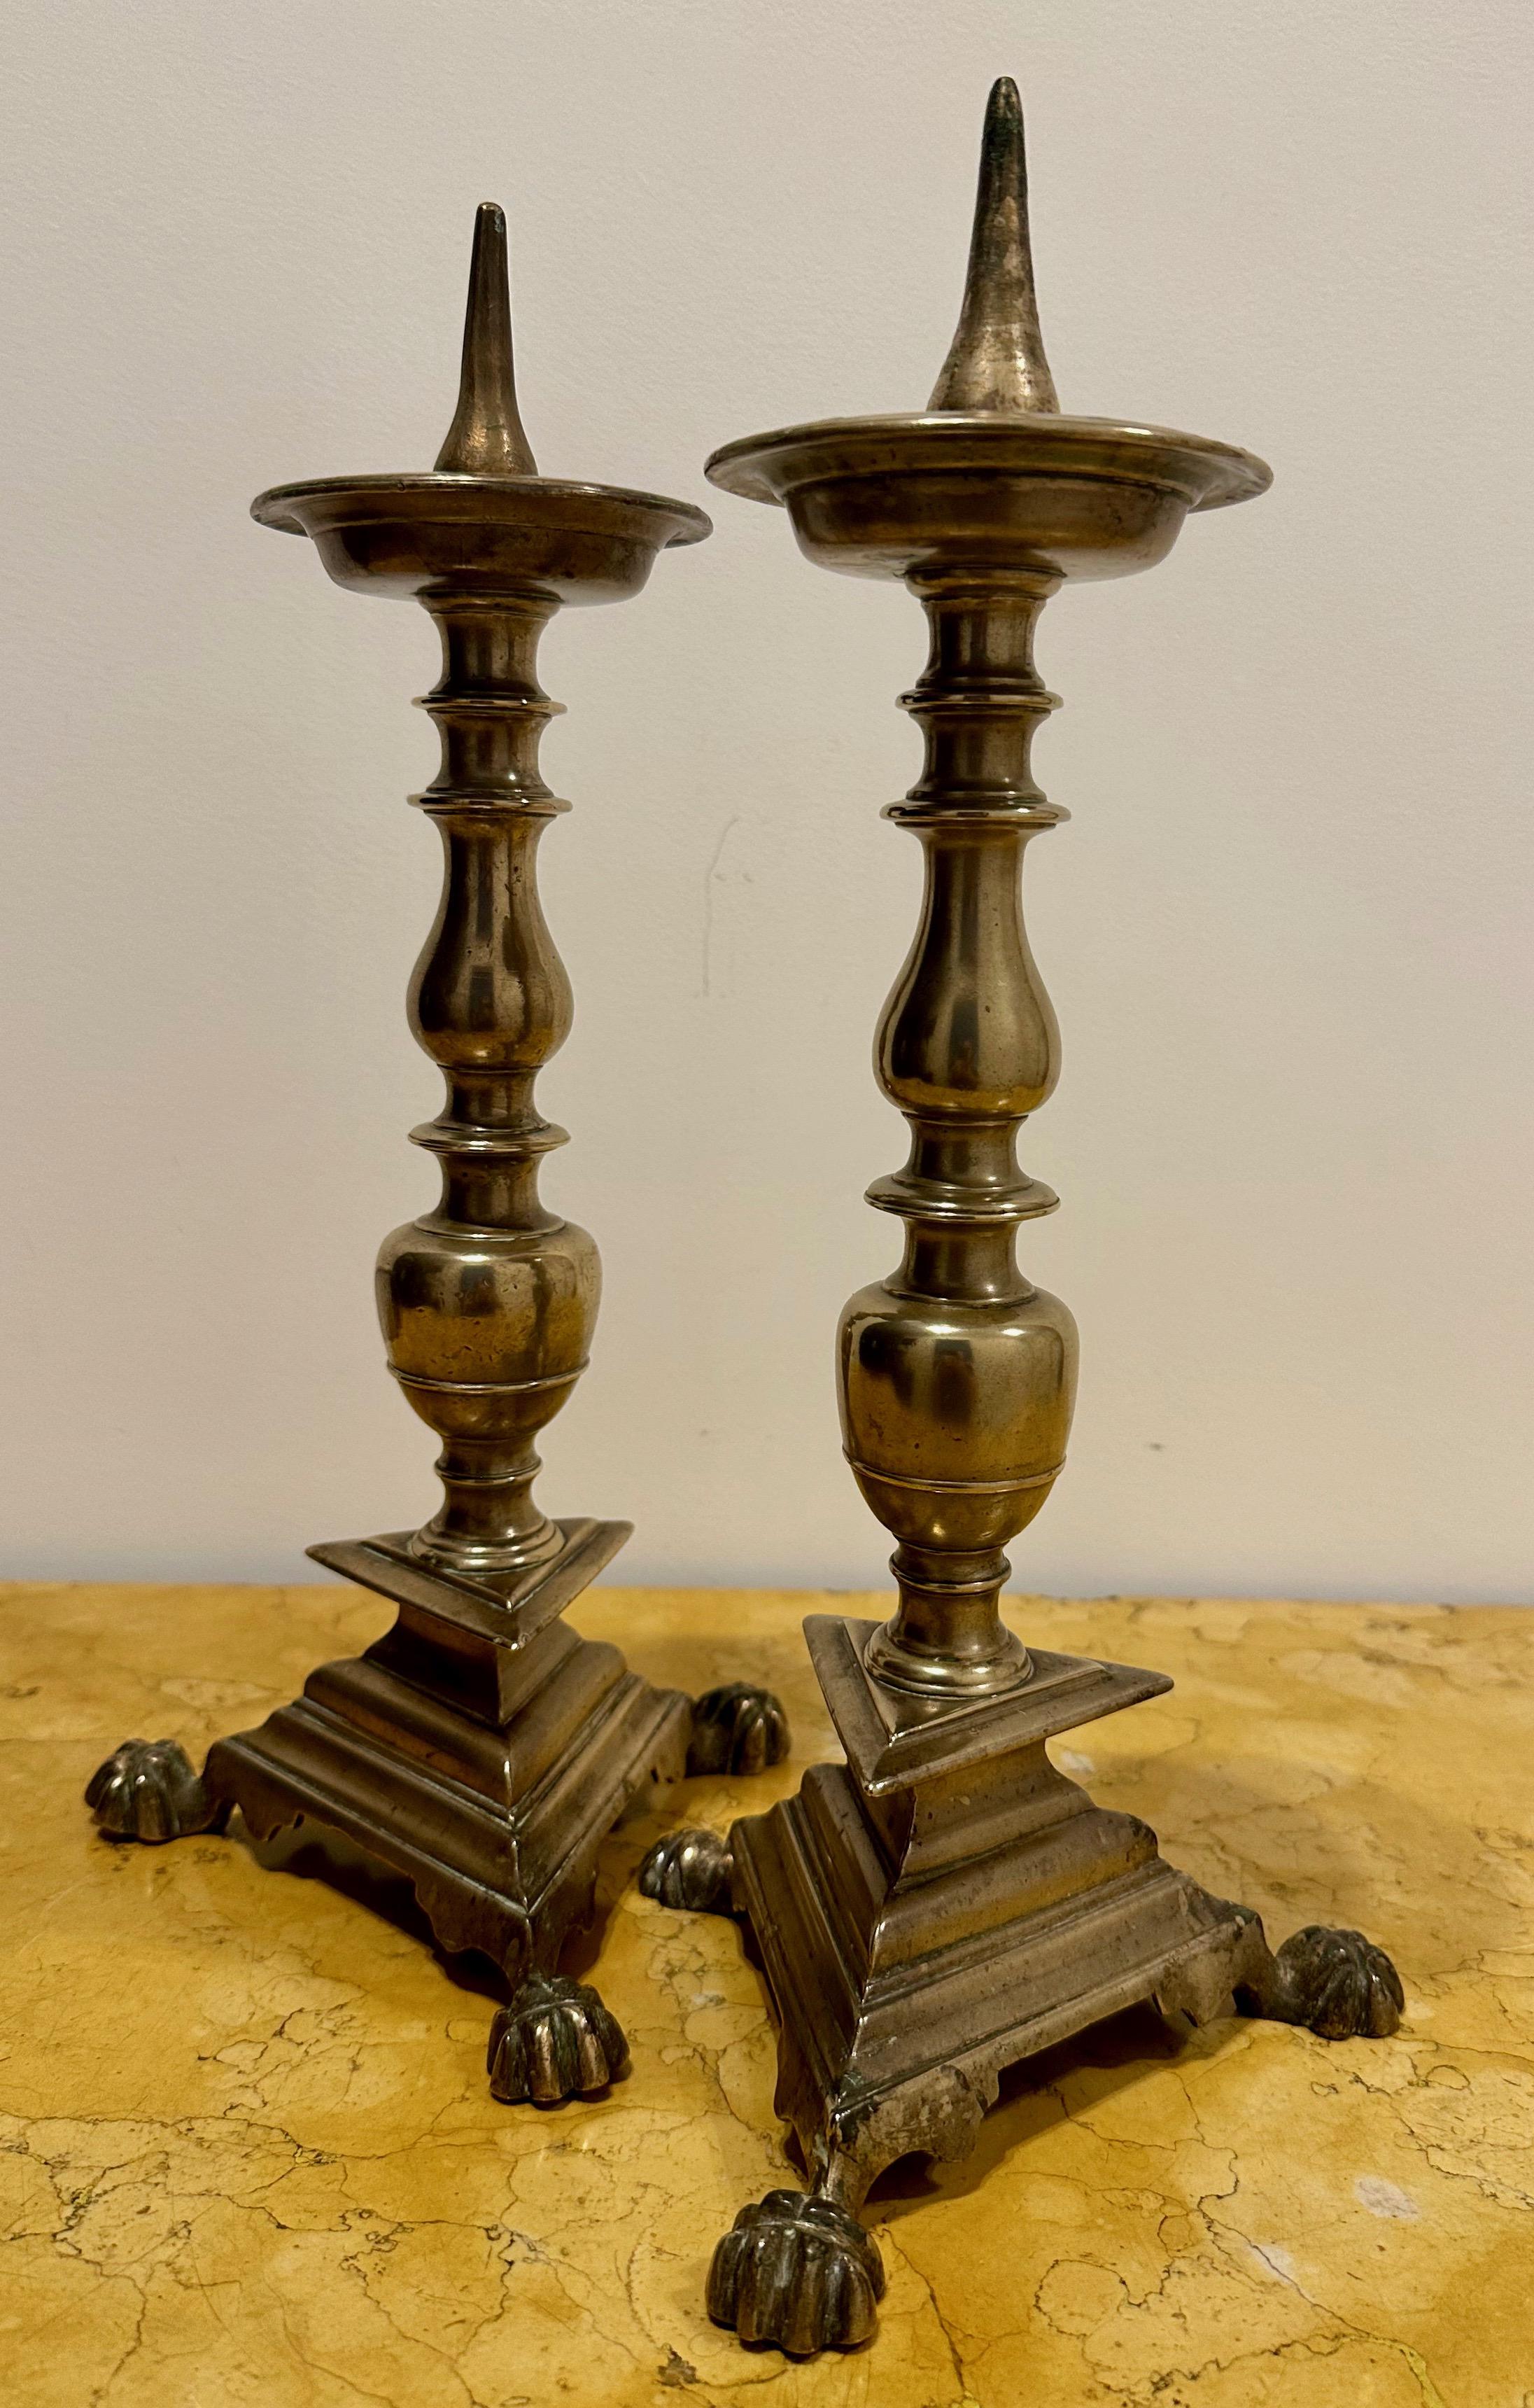 Italian Baroque, Pair of Bronze Pricked Candlesticks, Late 17th Century

This Elegant pair of bronze candlesticks of the late 17th century, are resting on a tripod base sitting on claw feet. The central turned baluster is topped by a large cup that